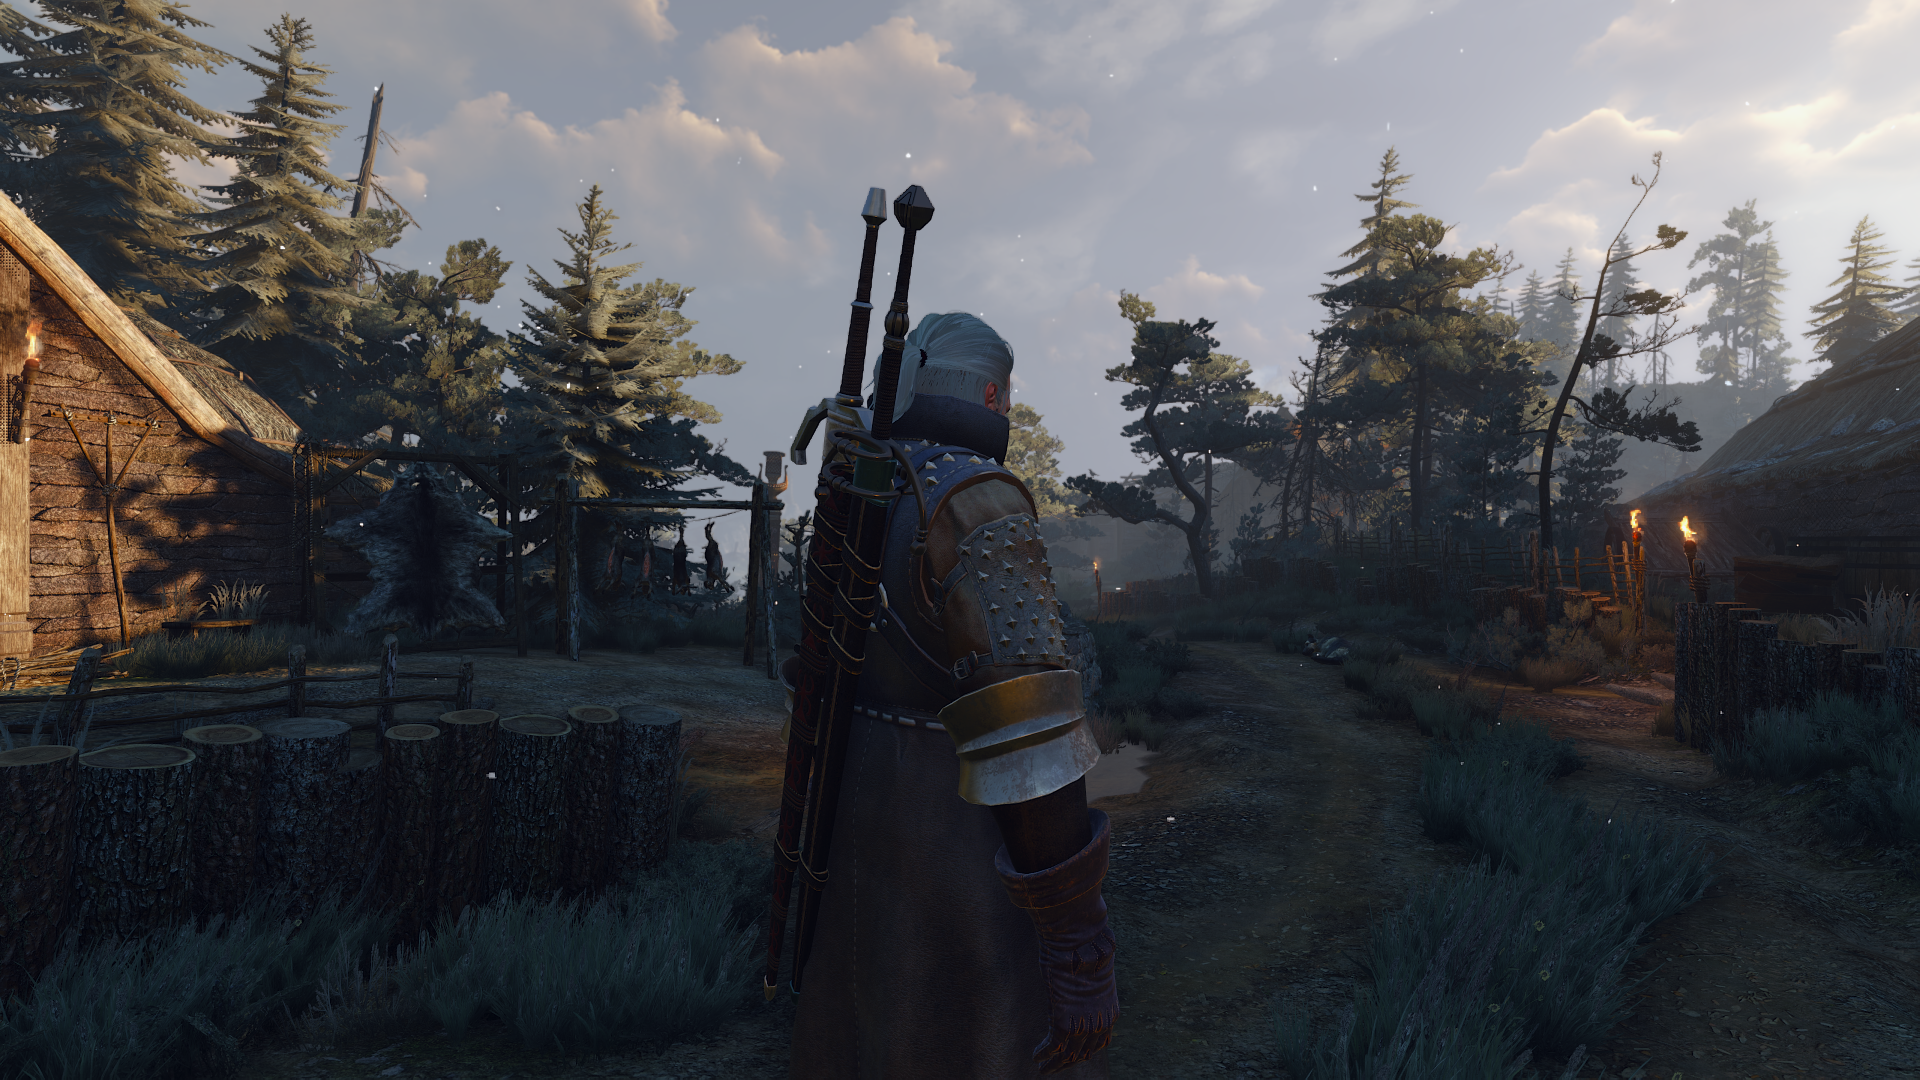 The Witcher The Witcher 3 Wild Hunt Blood And Wine The Witcher 3 Wild Hunt Hearts Of Stone The Witch 1920x1080